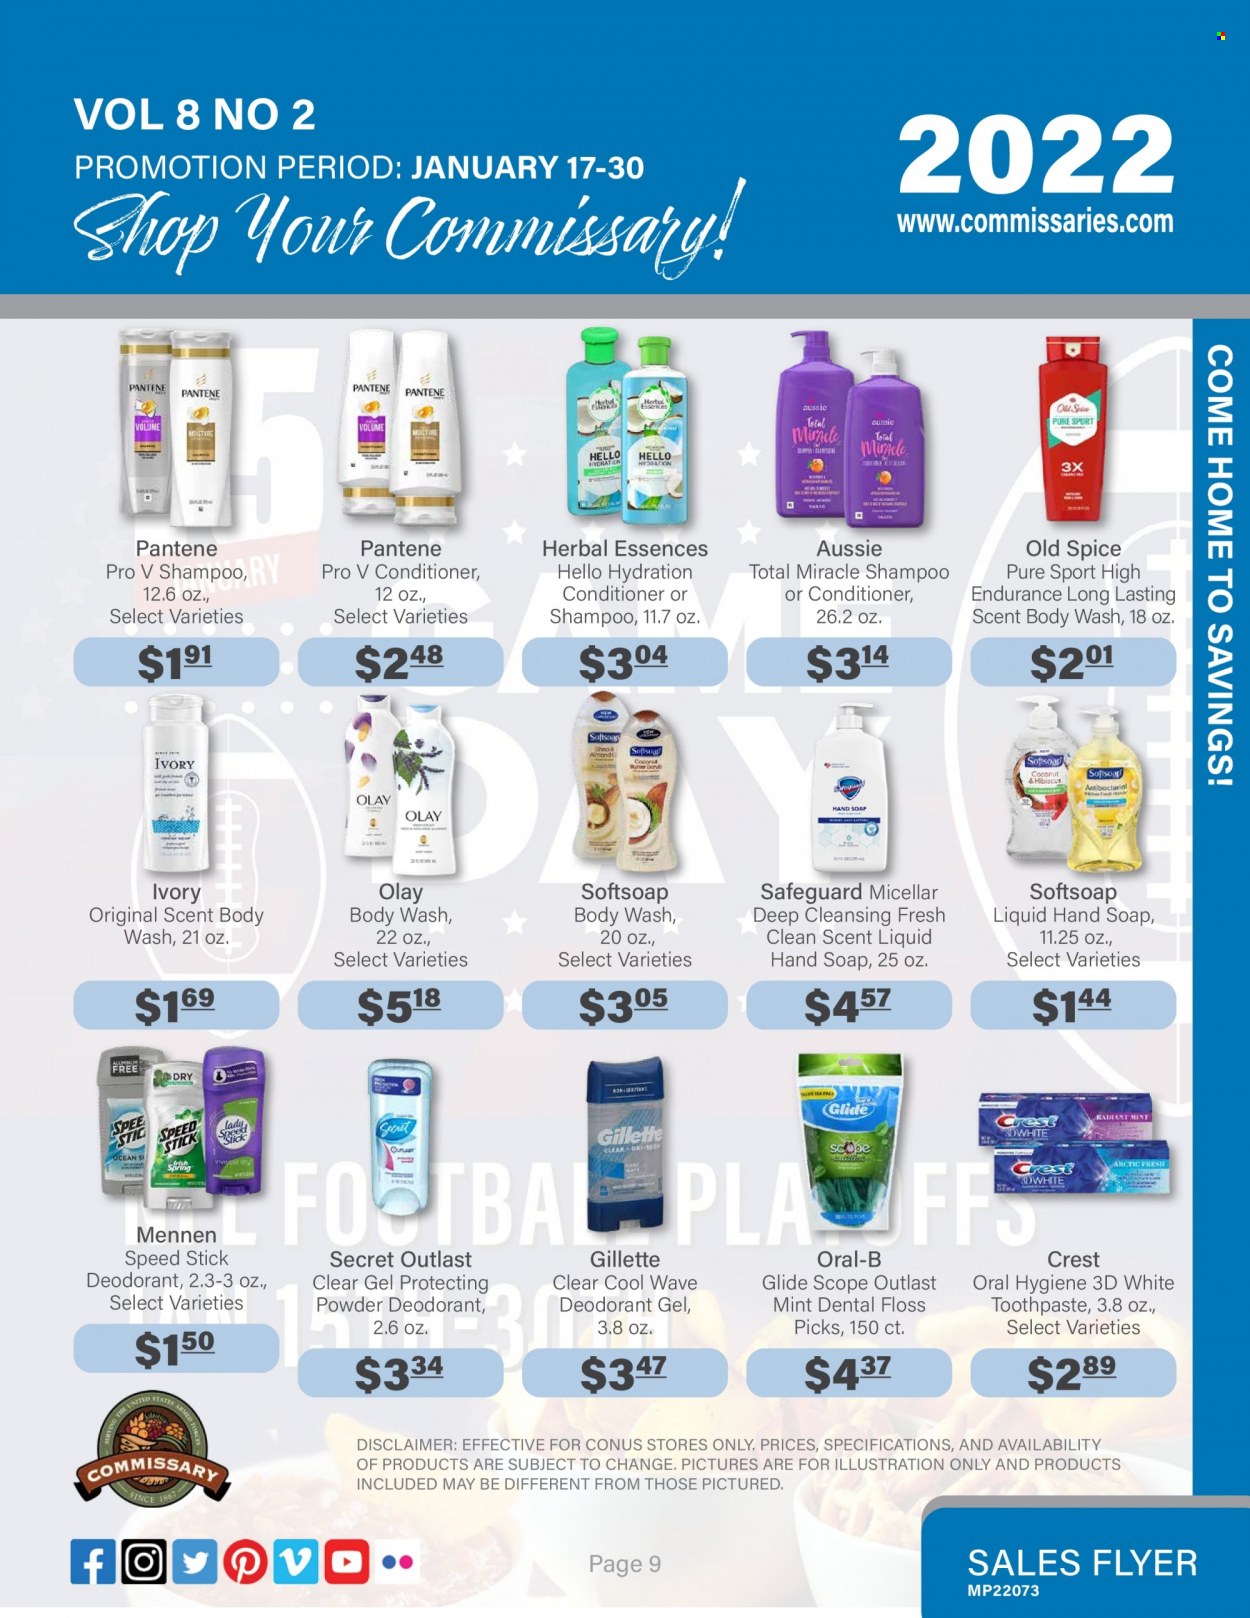 thumbnail - Commissary Flyer - 01/17/2022 - 01/30/2022 - Sales products - spice, WAVE, body wash, shampoo, Softsoap, hand soap, Old Spice, soap, Oral-B, toothpaste, Crest, Olay, Aussie, conditioner, Pantene, Herbal Essences, anti-perspirant, Speed Stick, deodorant, Gillette. Page 9.